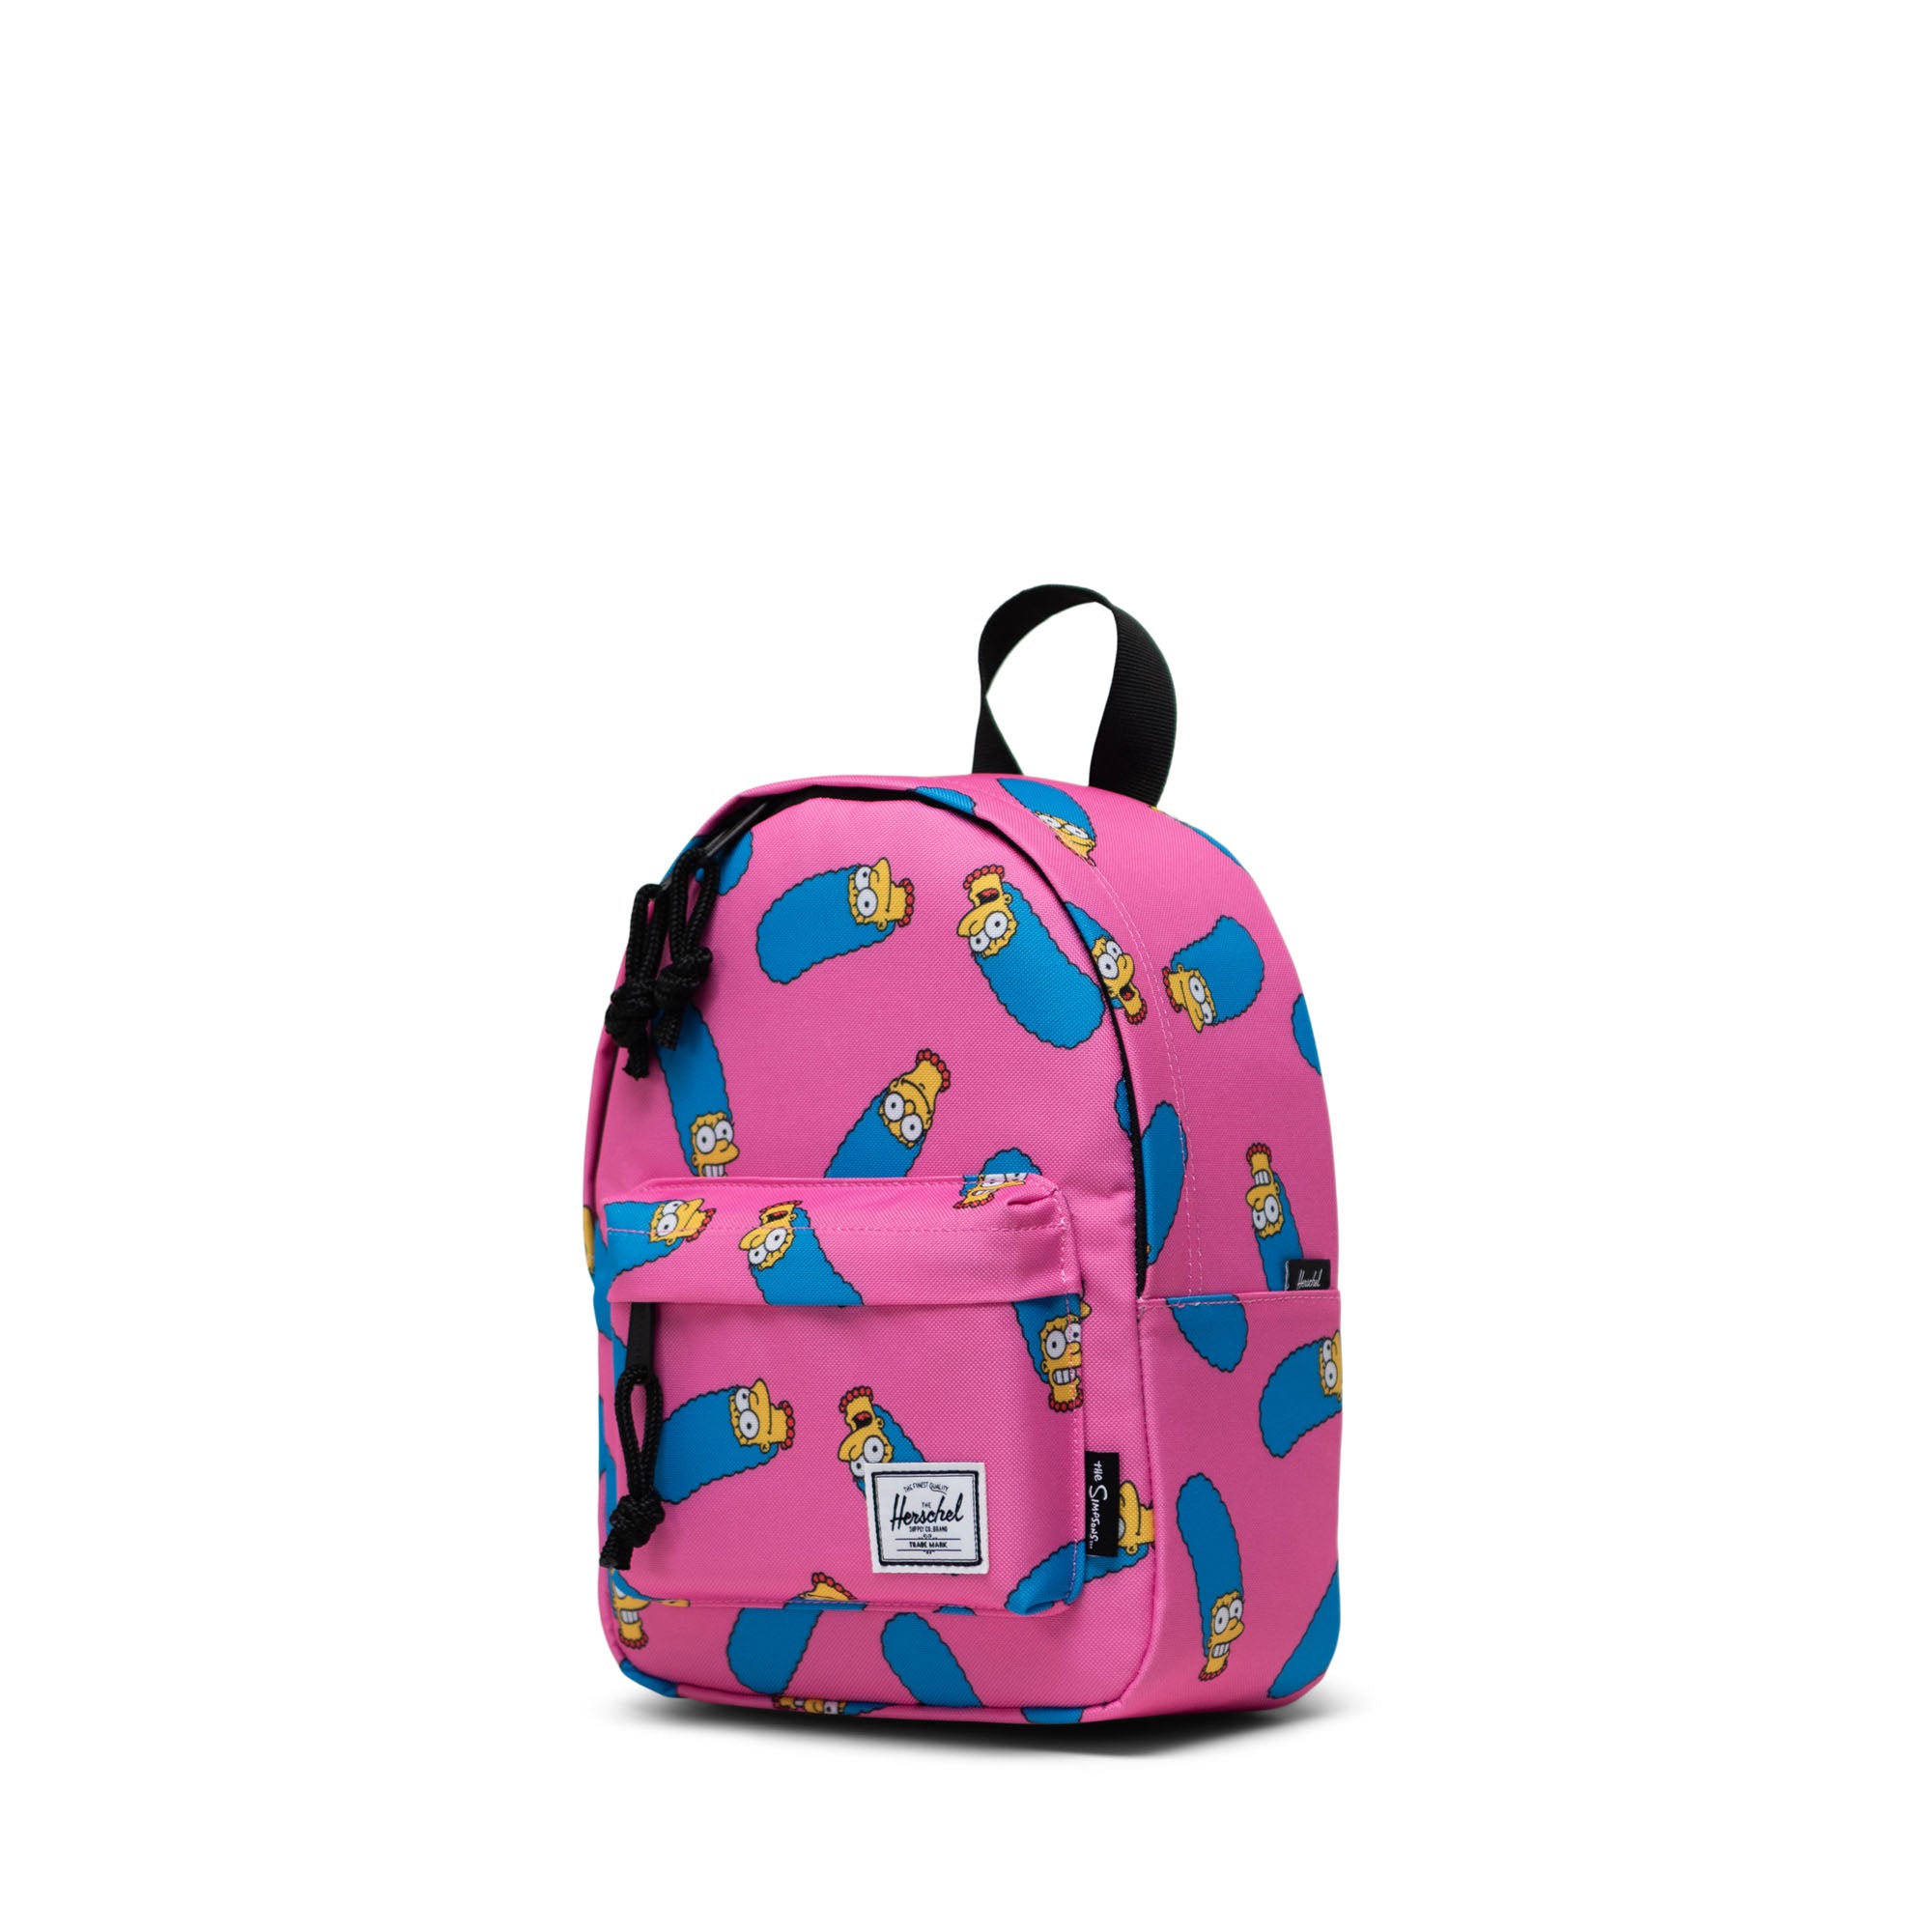 Herschel Supply Co. | Classic Backpack Mini - Marge Simpson